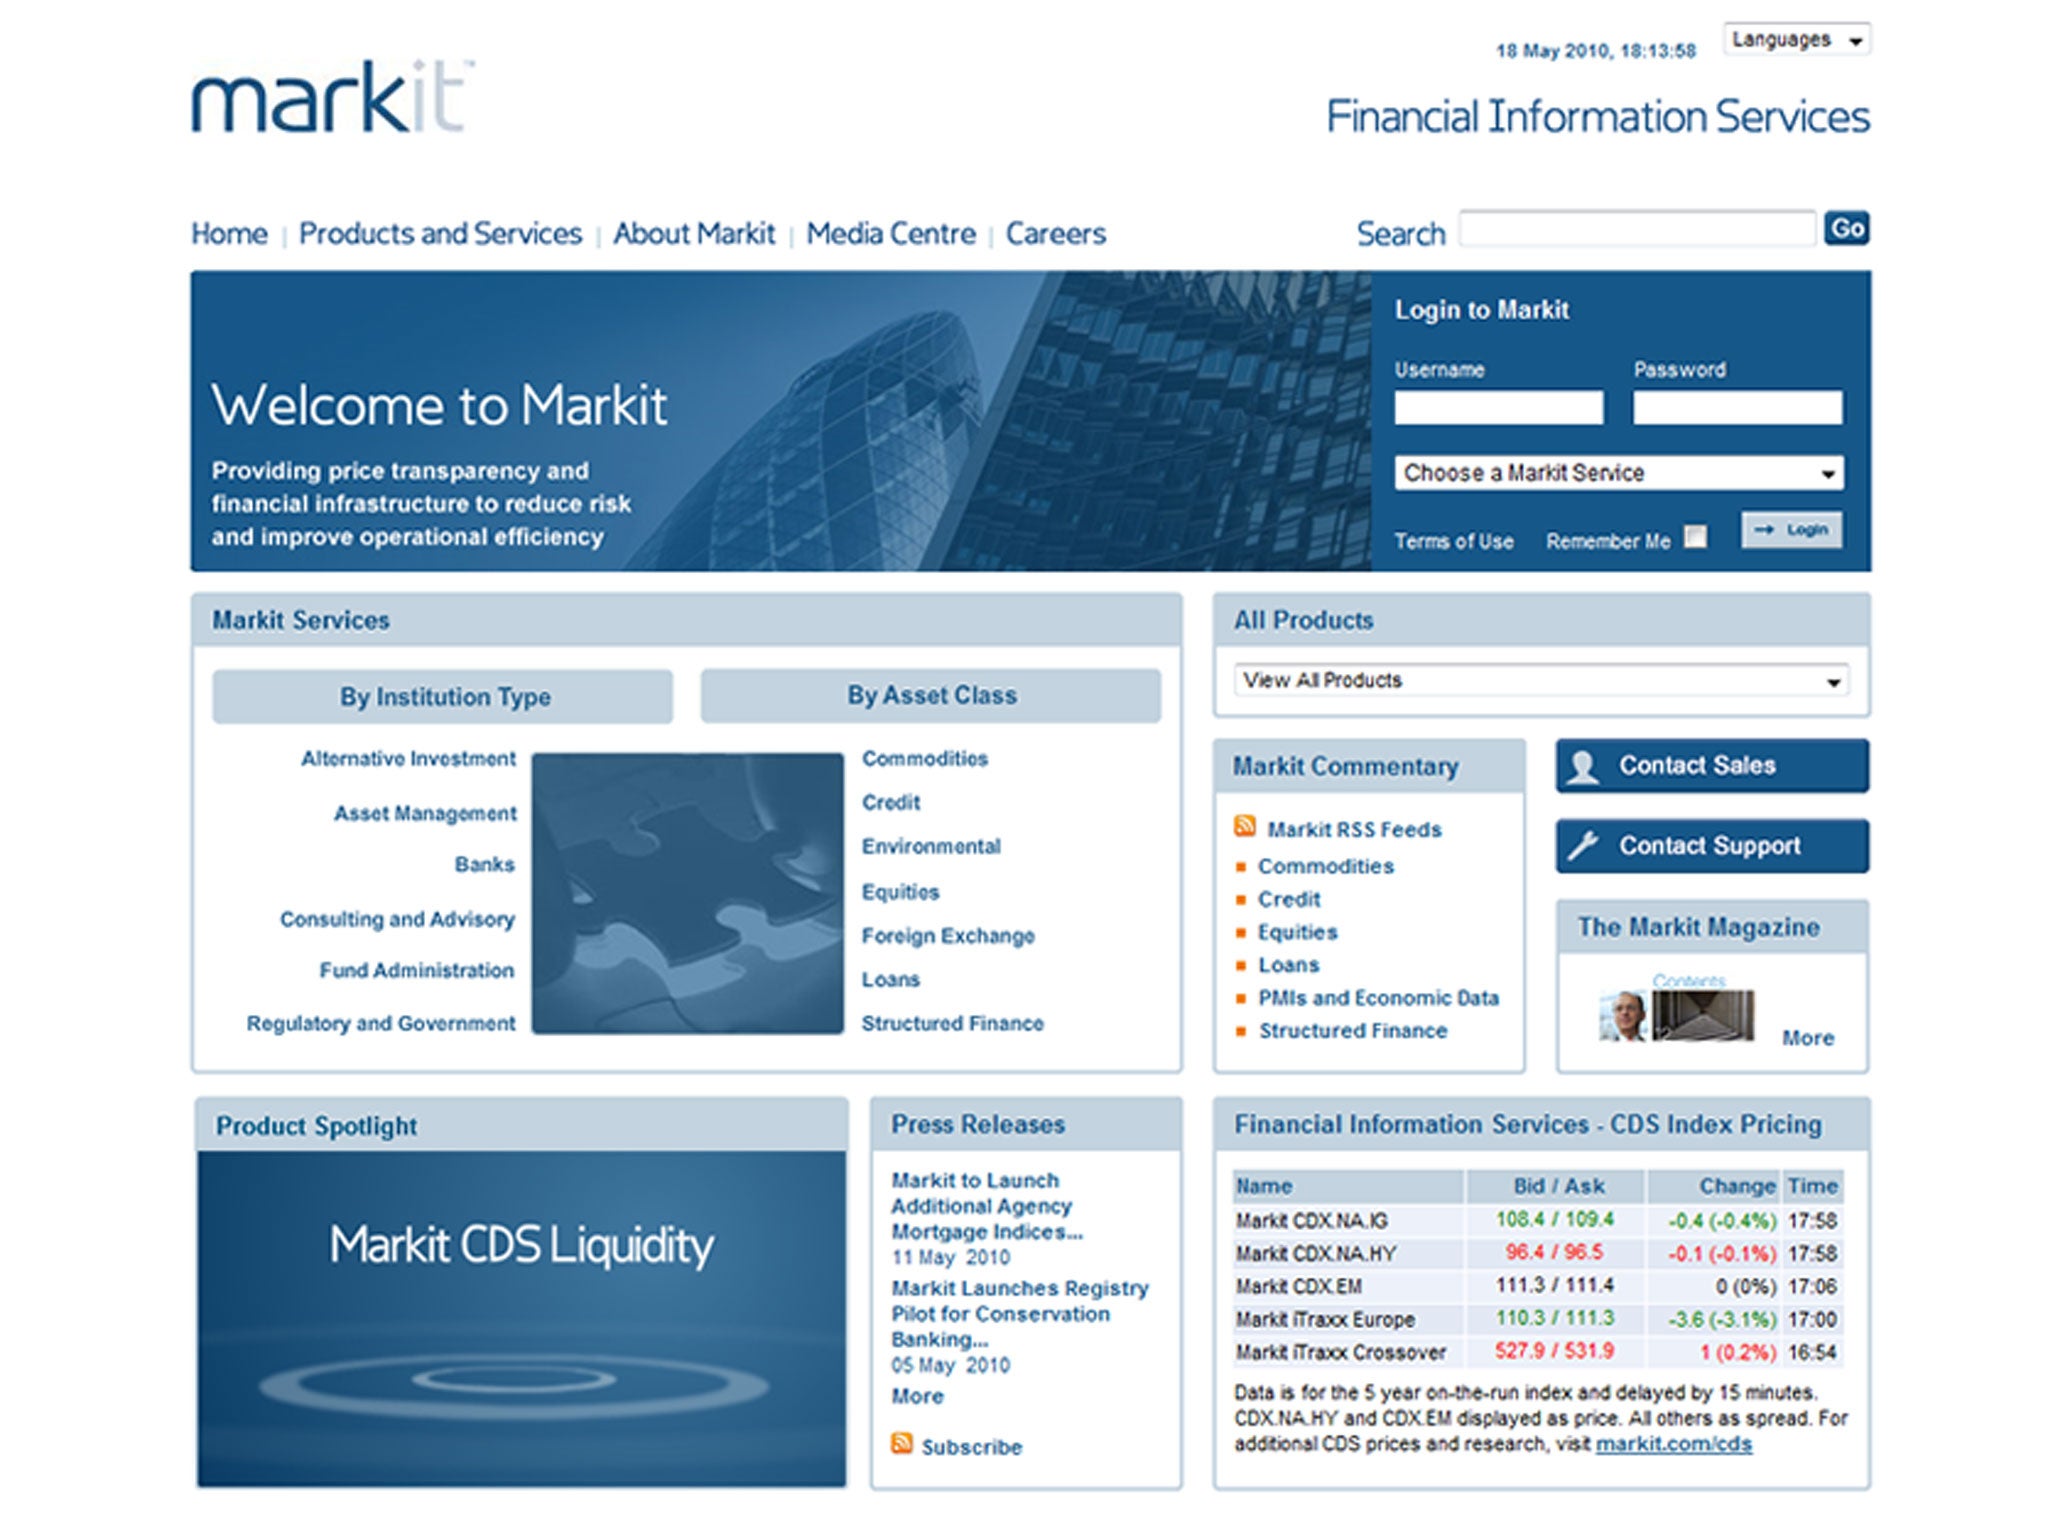 Markit competes with Thomson Reuters and Bloomberg in the provision of trading data and information and its major shareholders